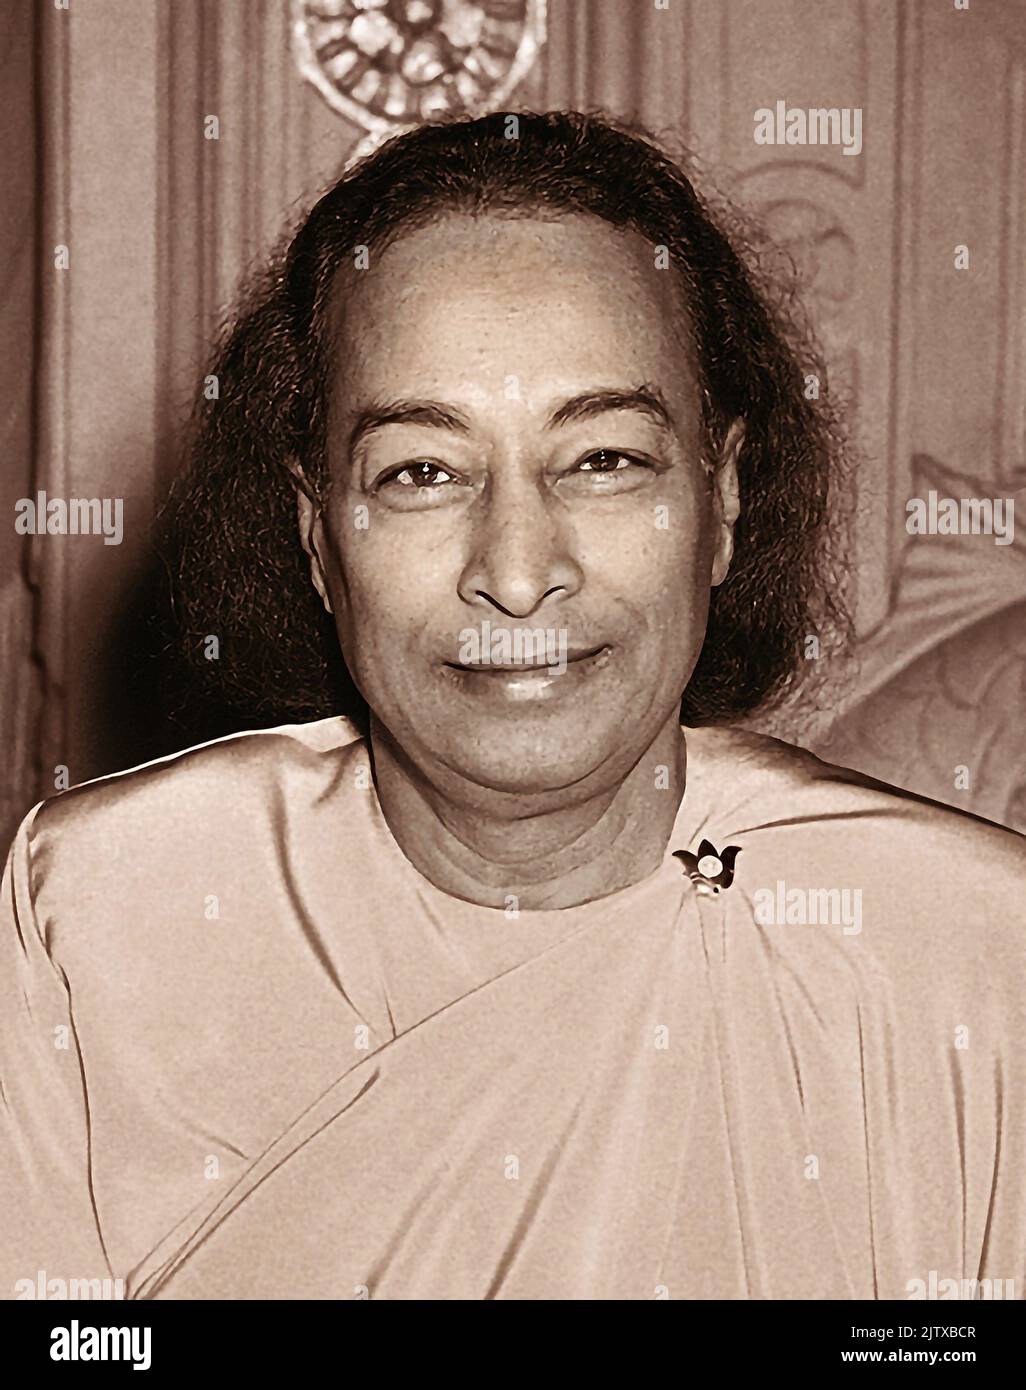 Paramahansa Yogananda (Gorakhpur, January 5, 1893 â€“ died in Los Angeles, March 7, 1952). He was a Hindu guru, a forerunner of yoga in the West. He Stock Photo